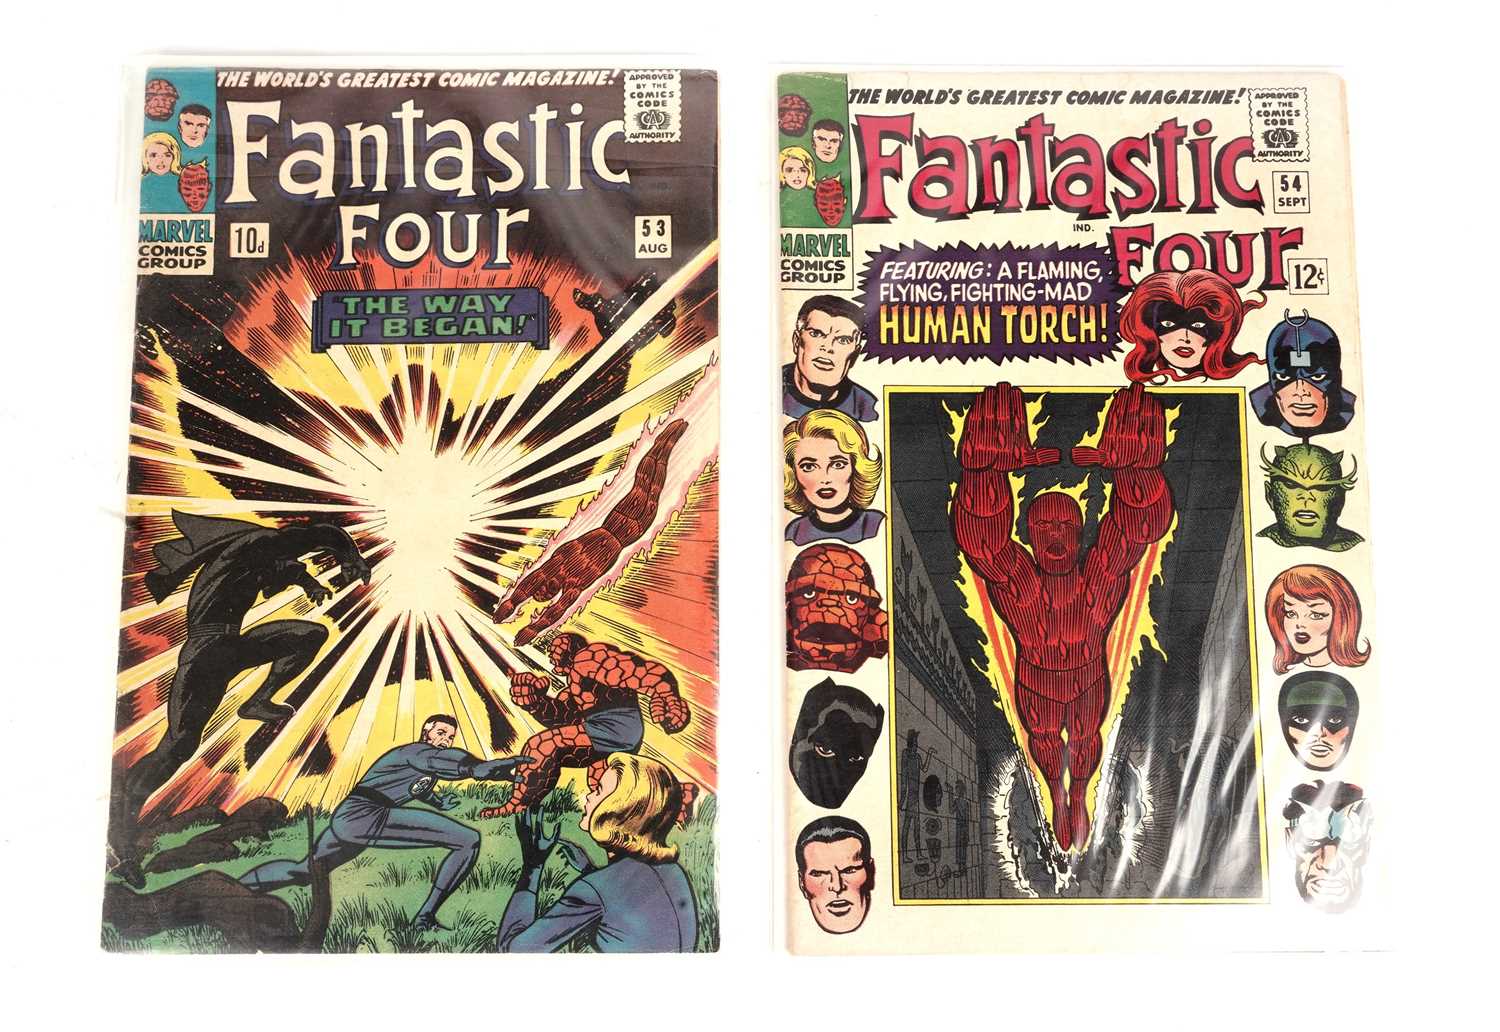 The Fantastic Four No's. 53 and 54 by Marvel Comics